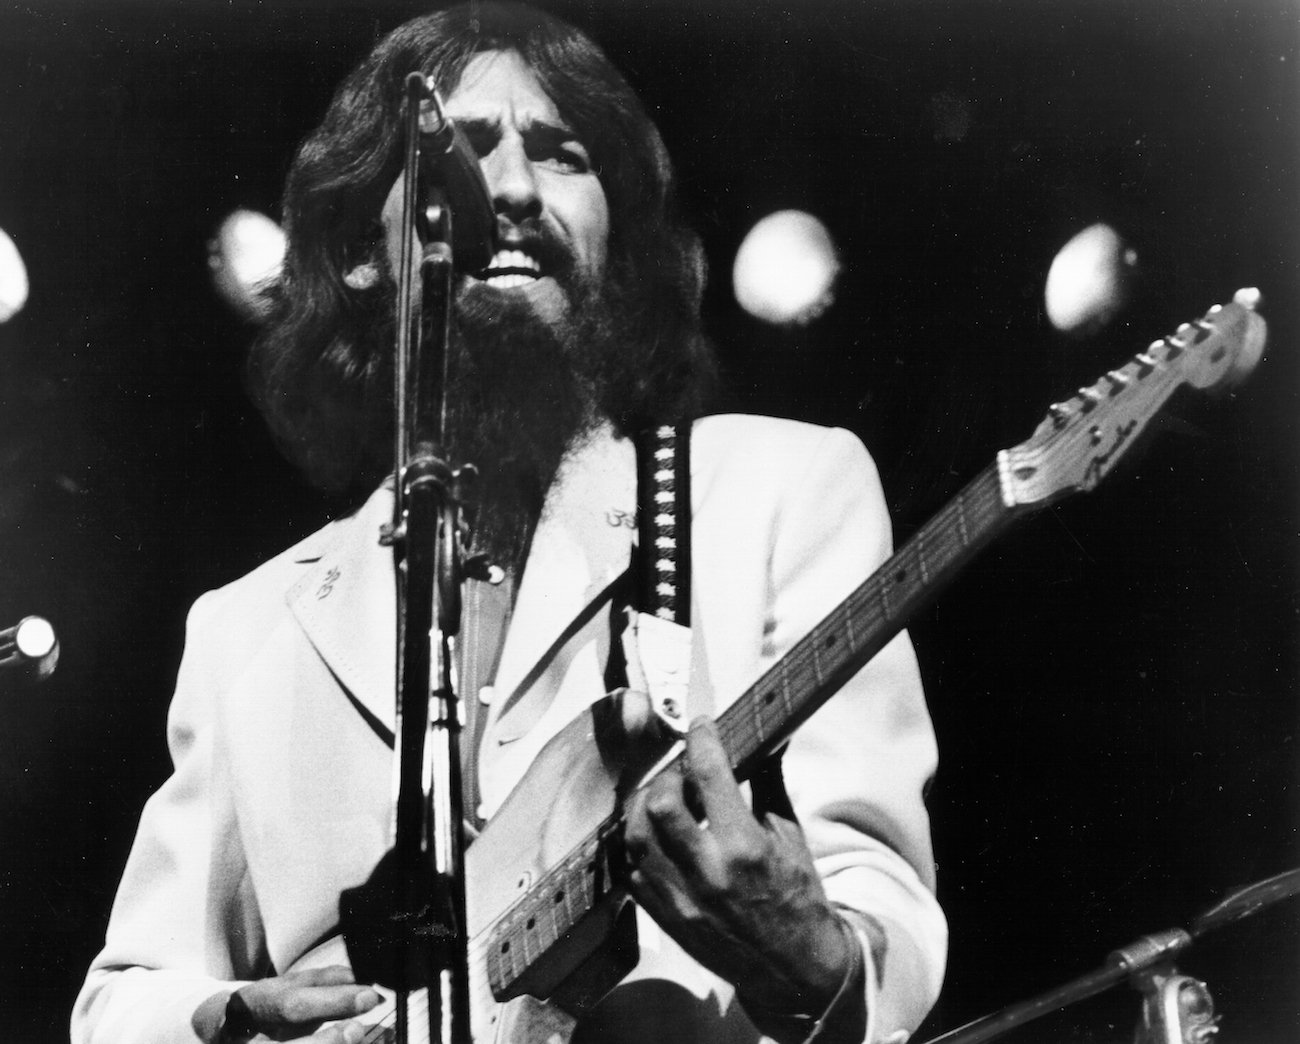 George Harrison performing at the Concert for Bangladesh in 1971.